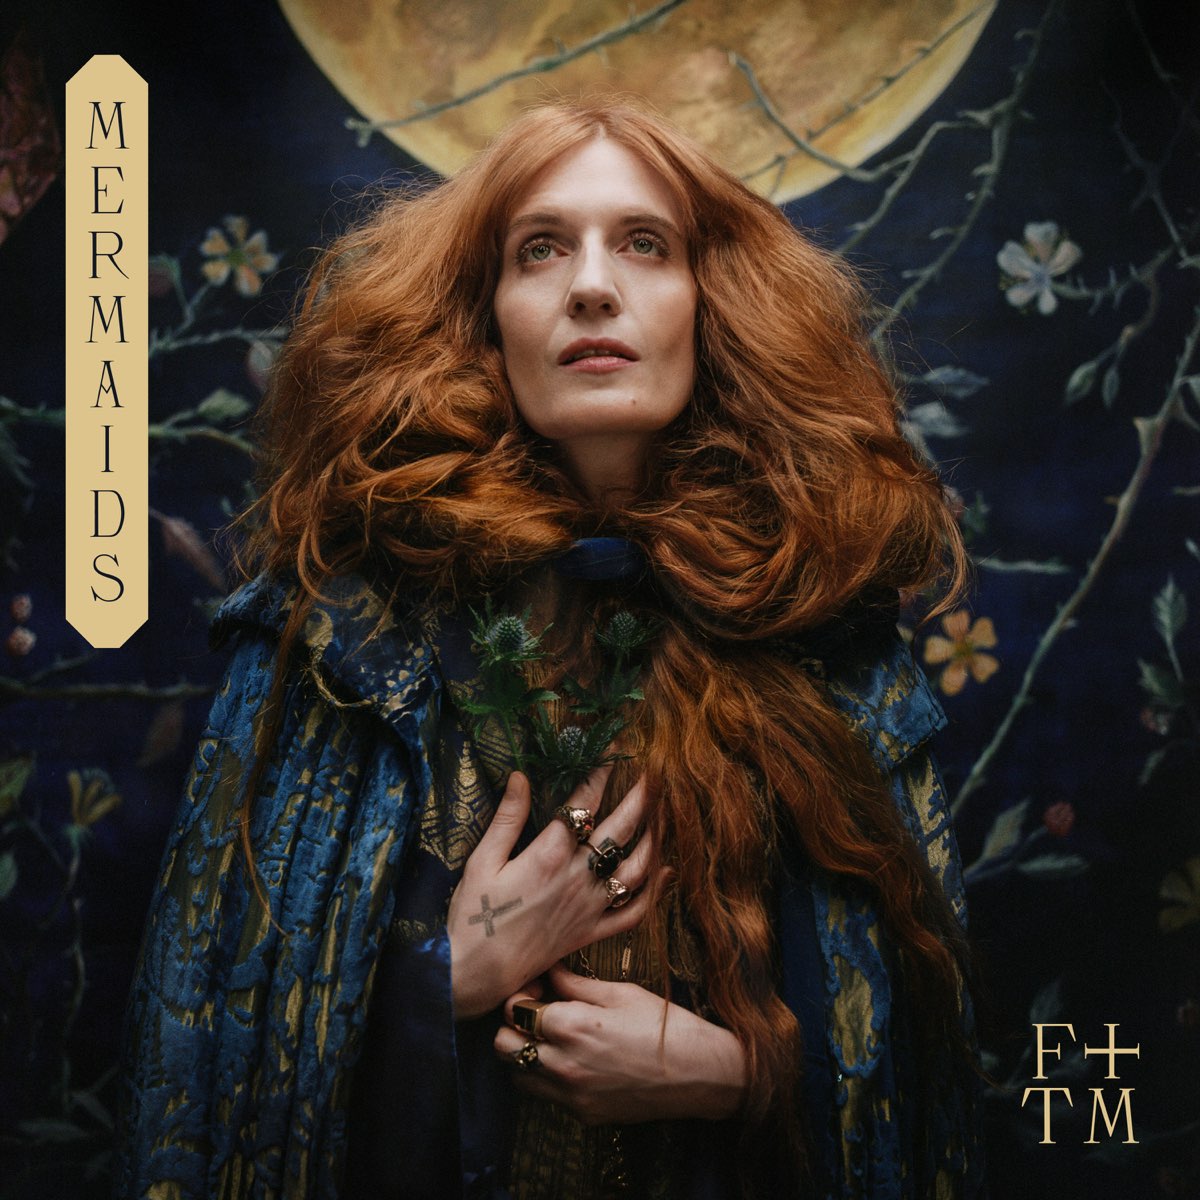 Florence + the Machine Mermaids cover artwork